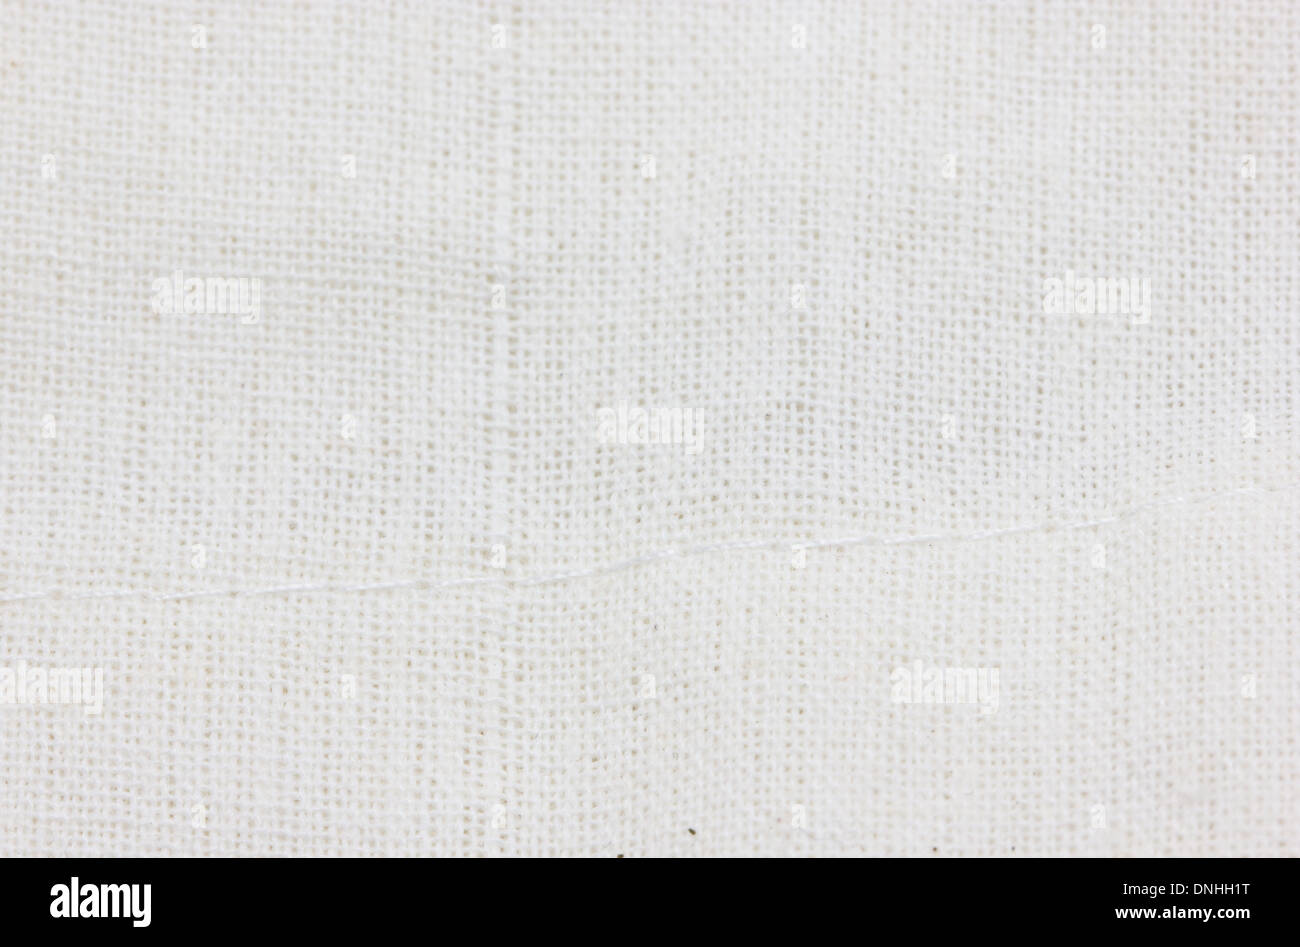 White Fabric Texture Or Background. Stock Photo